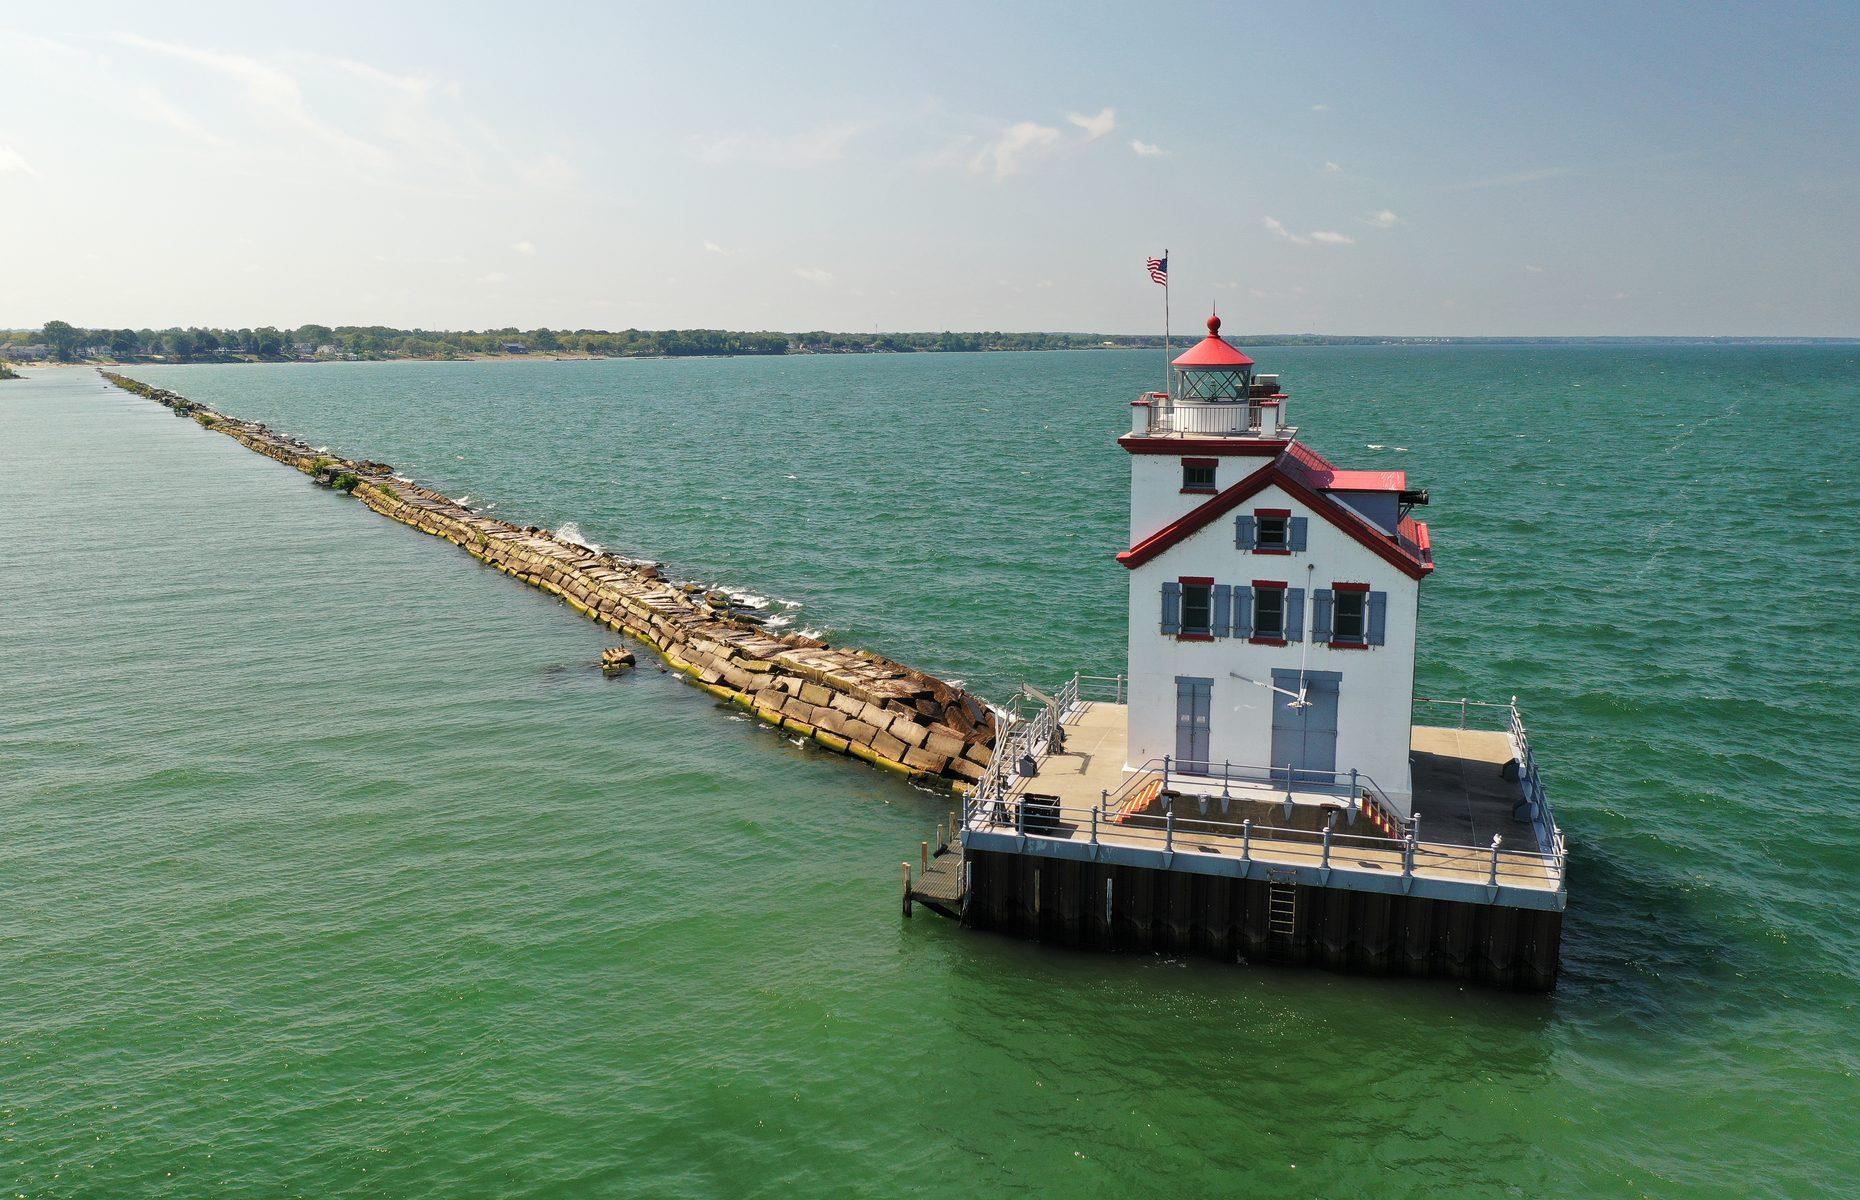 <p>Built in 1917 to guide shipping on Lake Erie, one of the US’ five Great Lakes, the picture-perfect Lorain lighthouse is no longer in operation – but it’s still much loved. The light's trustees and volunteers have ensured its legacy has not been forgotten by transforming it into a wonderful attraction, earning it the nickname “Jewel of the Port”. Sunset dinners and tours are still running during <a href="https://lorainlighthouse.com/upcomingevents/">the summer season</a> with COVID restrictions in place. </p>